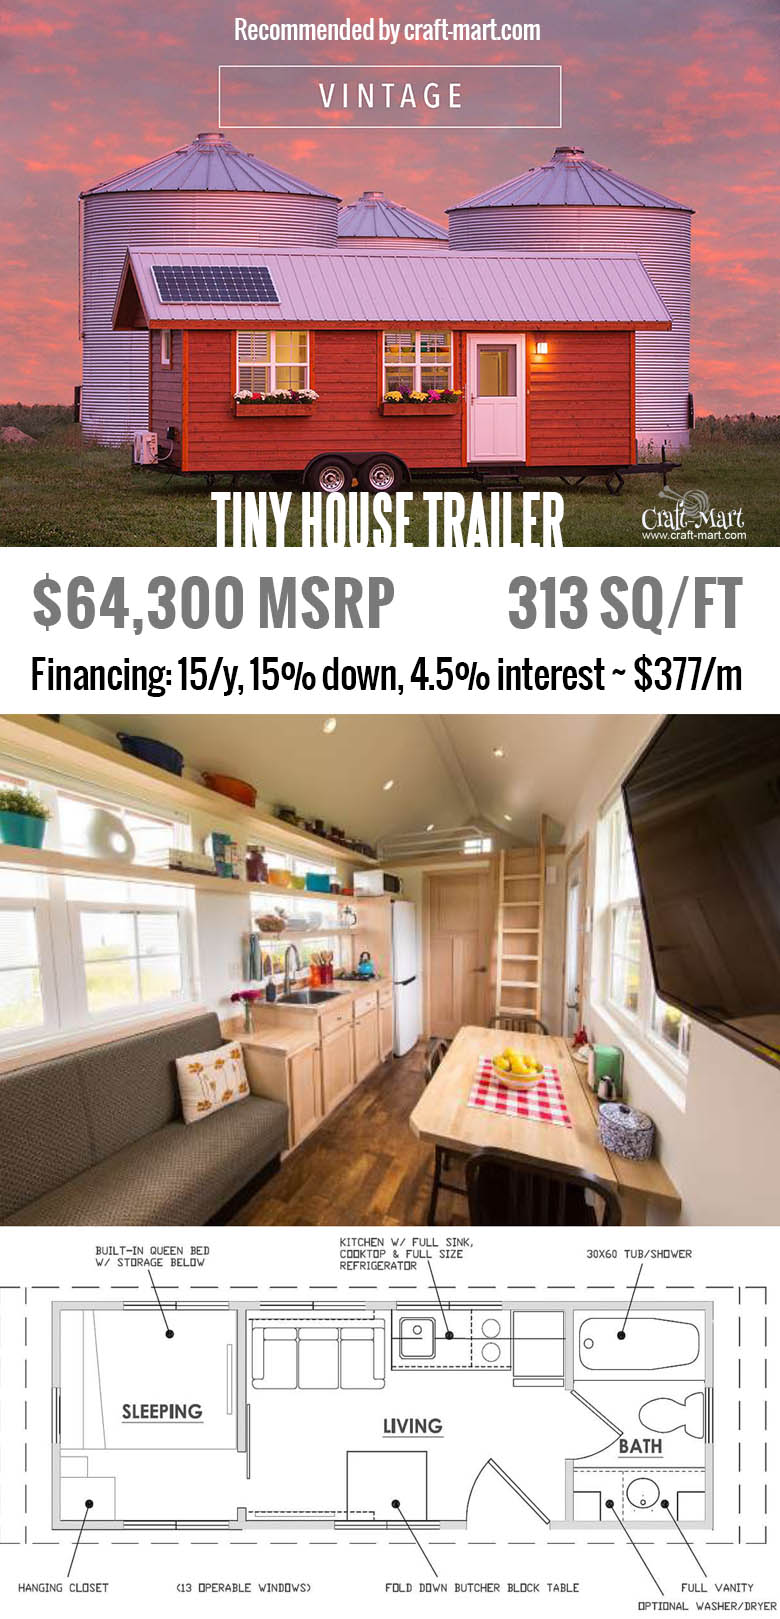 Vintage is full of light with a dozen, large opening windows. Do you have a place to put one of these tiny houses? Get one of these for FREE and start earning money from renting it! Or simply buy one of the most beautiful tiny house trailers with easy financing starting from $195/m! #tinyhouse #tinyhouseplans #minimalism